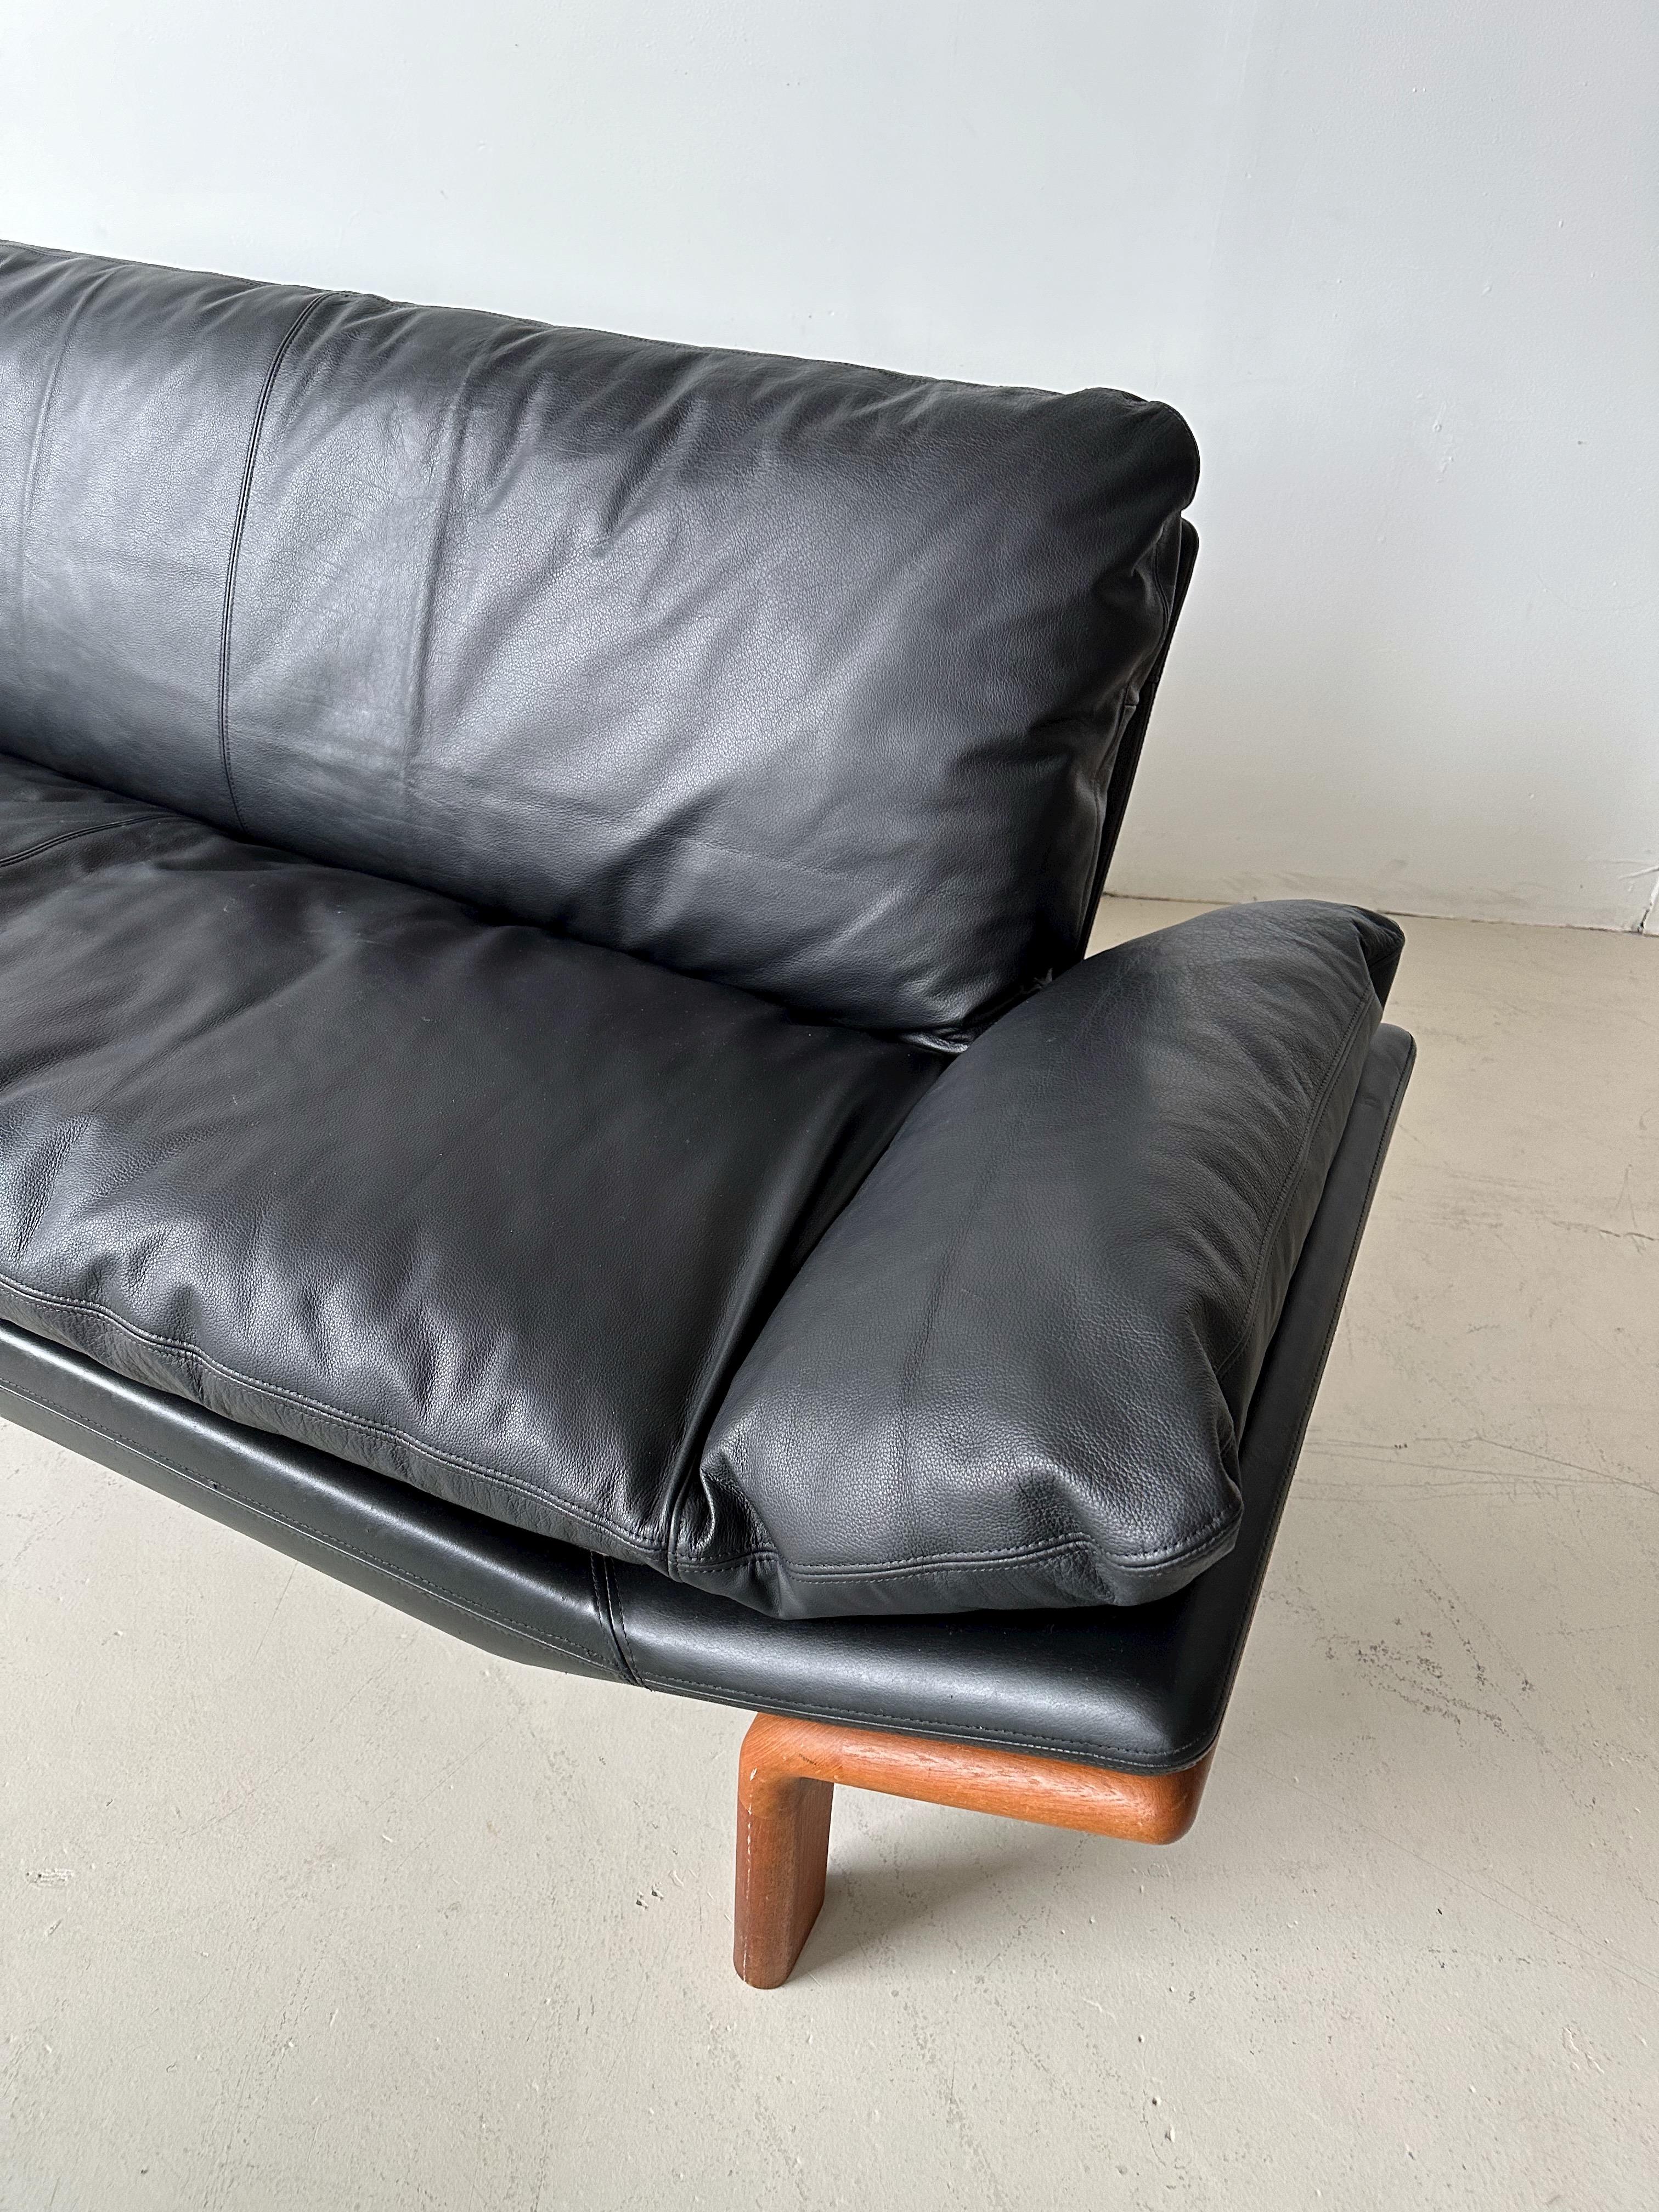 Mid-Century Modern Black Leather 3 Seater Sofa with Solid Teak Frame by Komfort Denmark